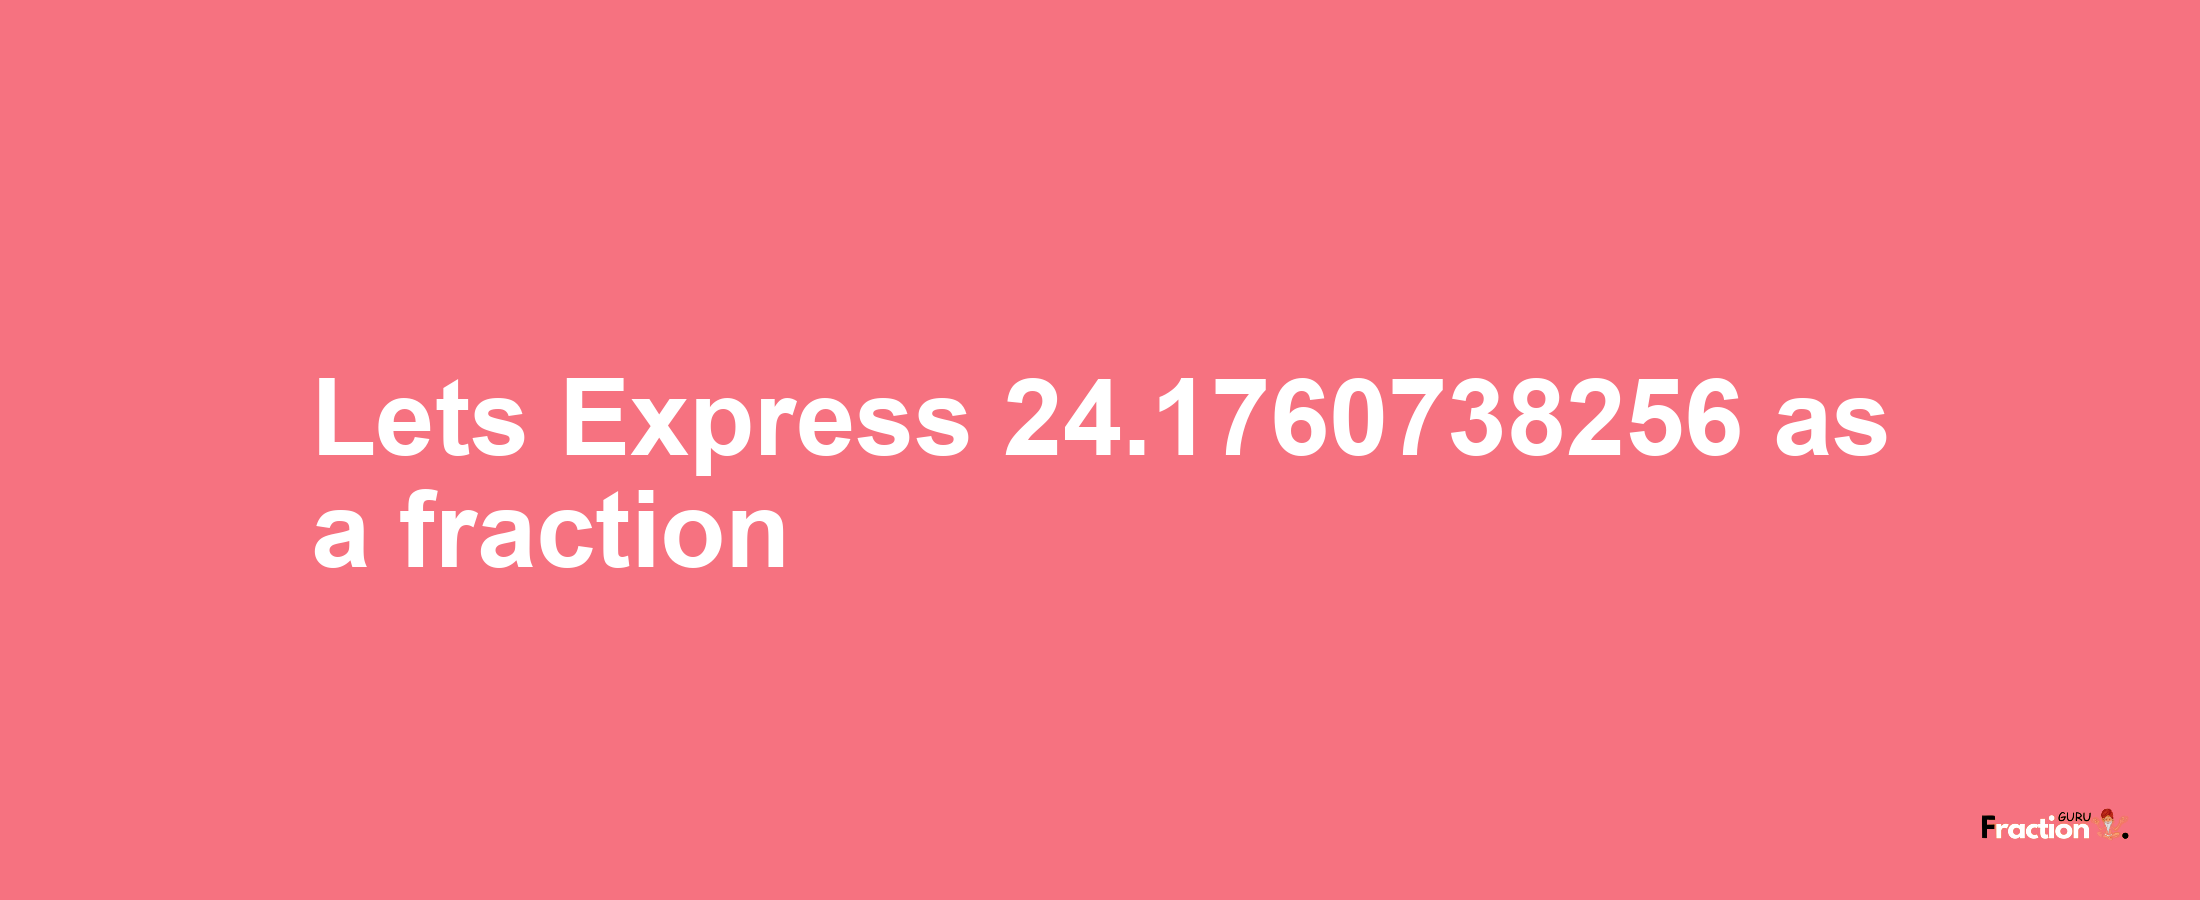 Lets Express 24.1760738256 as afraction